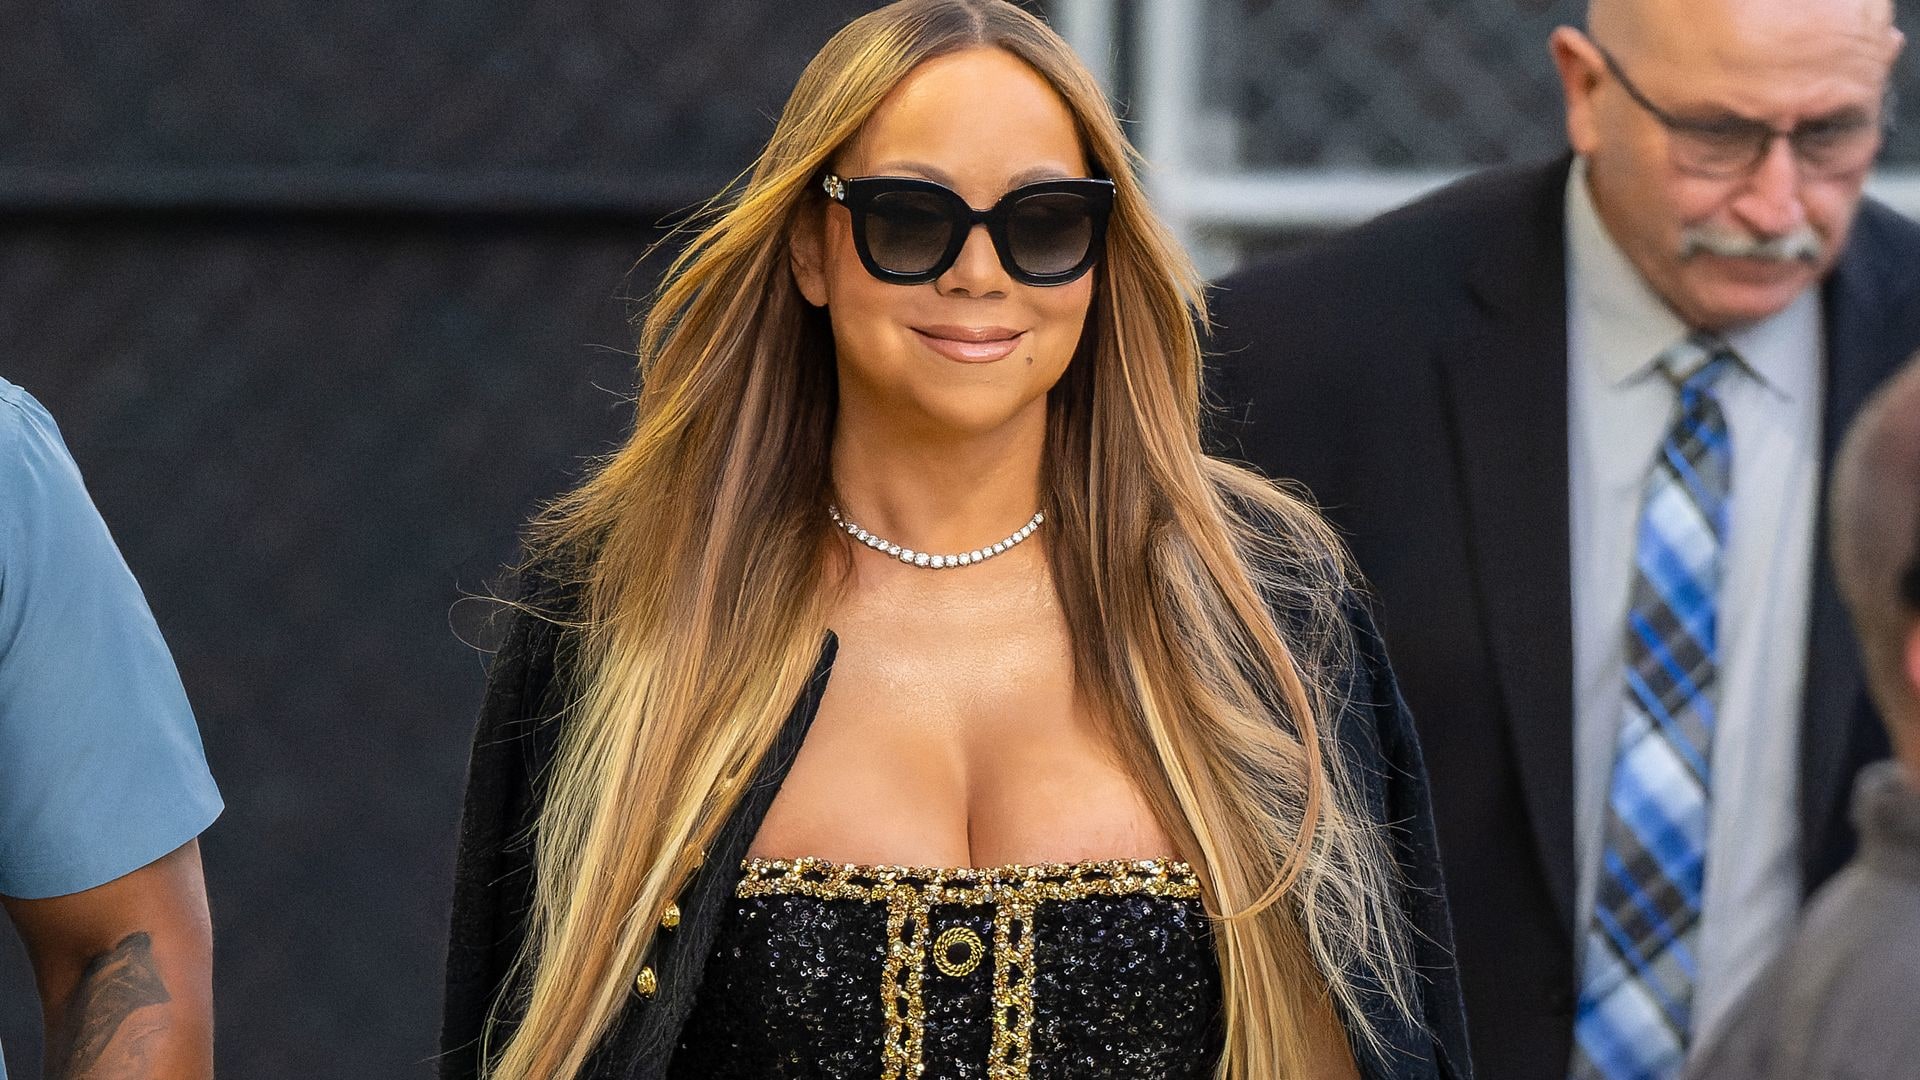 Mariah Carey shares rare video with twins during NYE celebrations following split